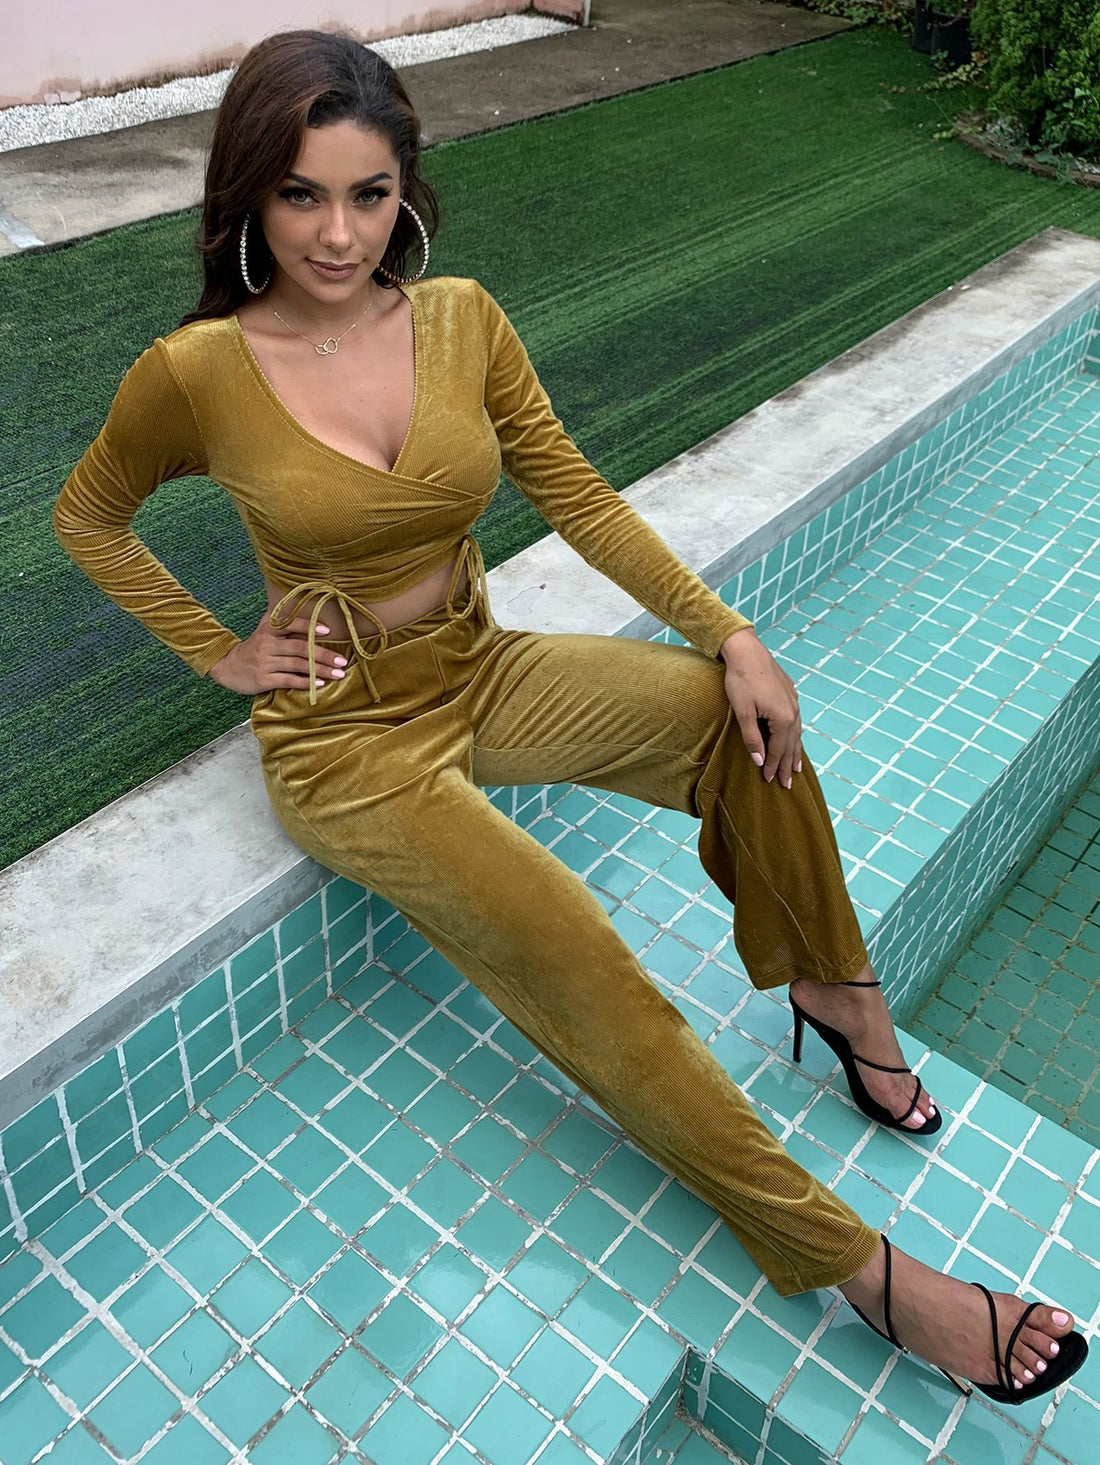 New Autumn 2022 Olive Green Velvet Crop Top &amp; Wide-Leg Trousers Co-ords